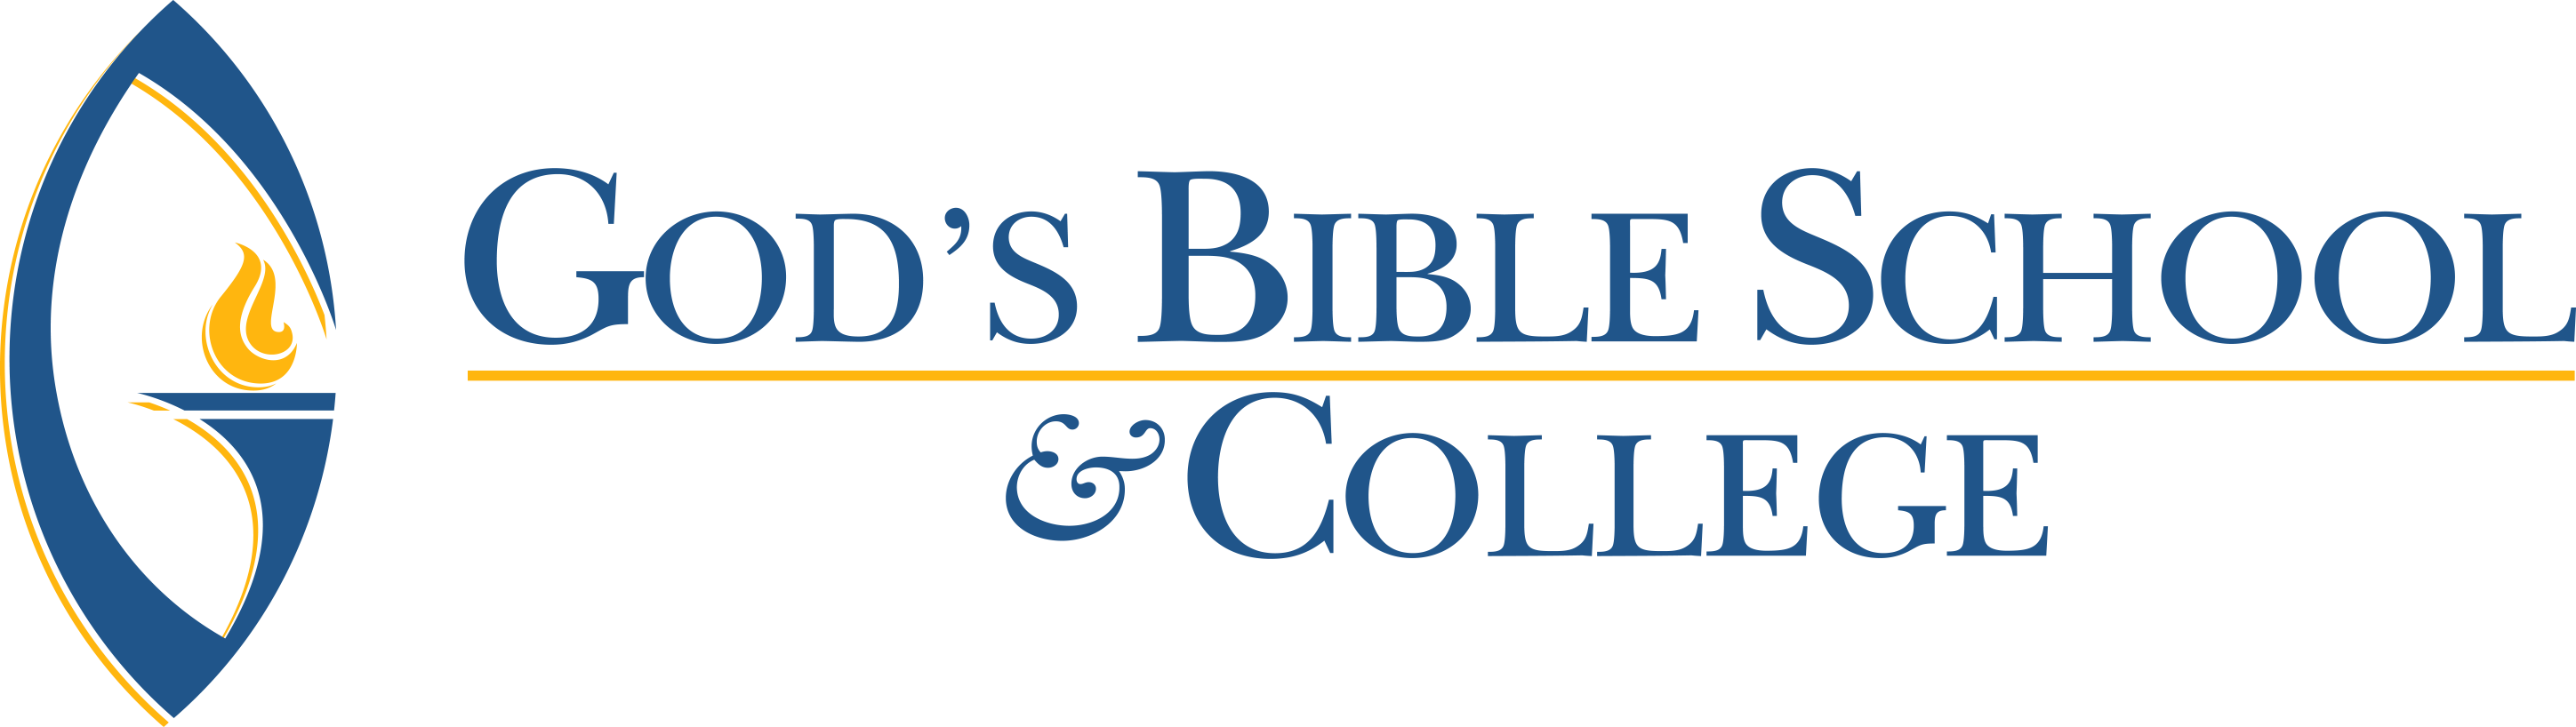 God's Bible School and College Company Logo